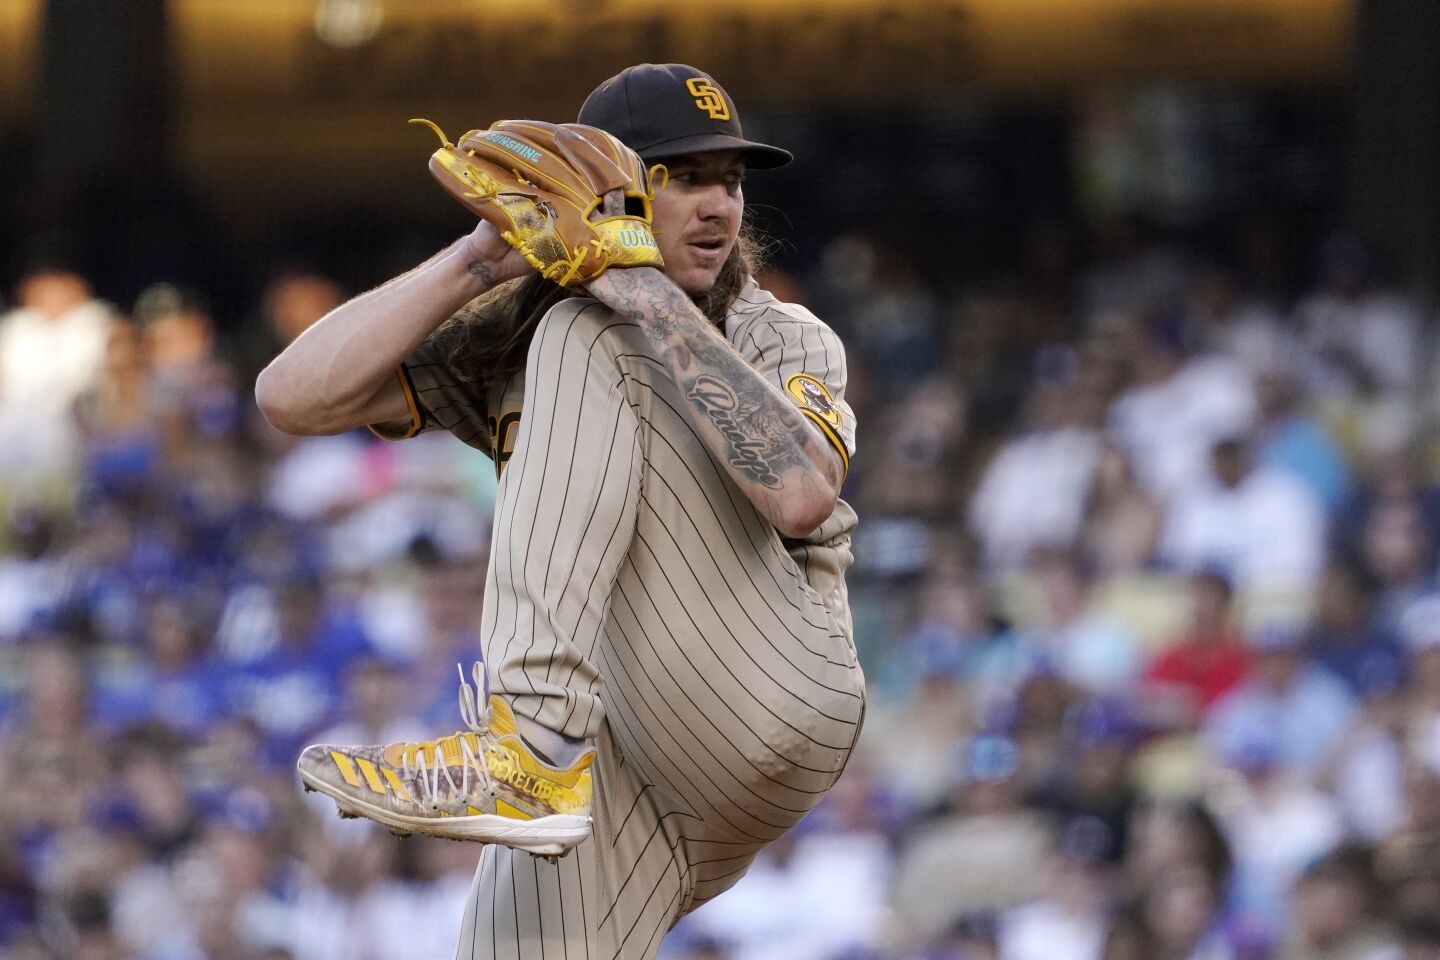 Game 1: Padres RHP Mike Clevinger (3-4, 3.60 ERA)He’d gone seven innings in back-to-back starts before allowing five runs in 4 2/3 innings at Dodger Stadium on Saturday. Clevinger’s lone start against Washington was in 2019, when he allowed six runs in 5 2/3 innings.